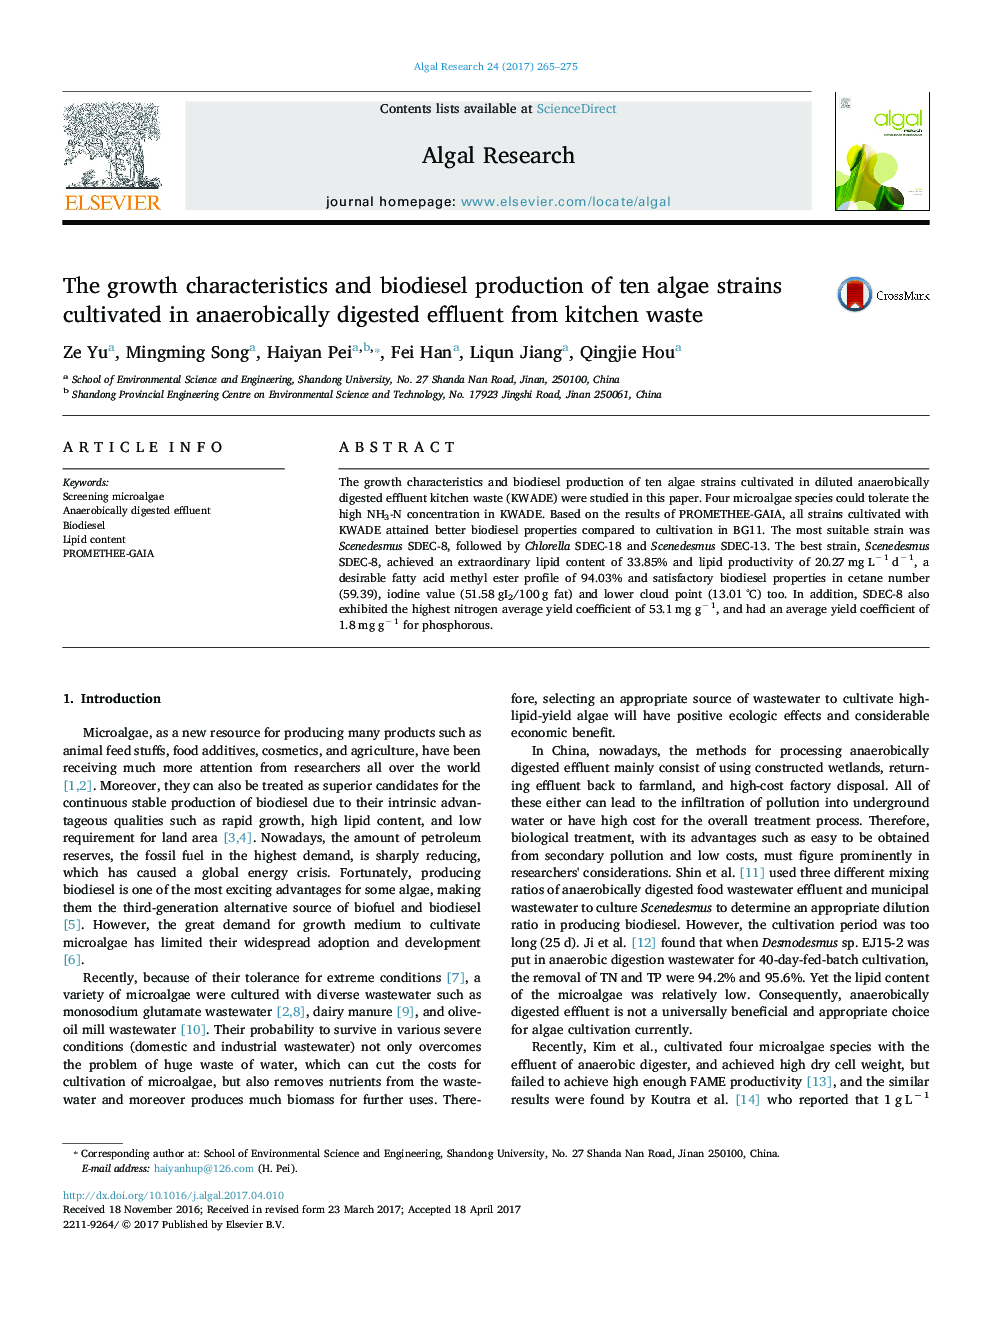 The growth characteristics and biodiesel production of ten algae strains cultivated in anaerobically digested effluent from kitchen waste